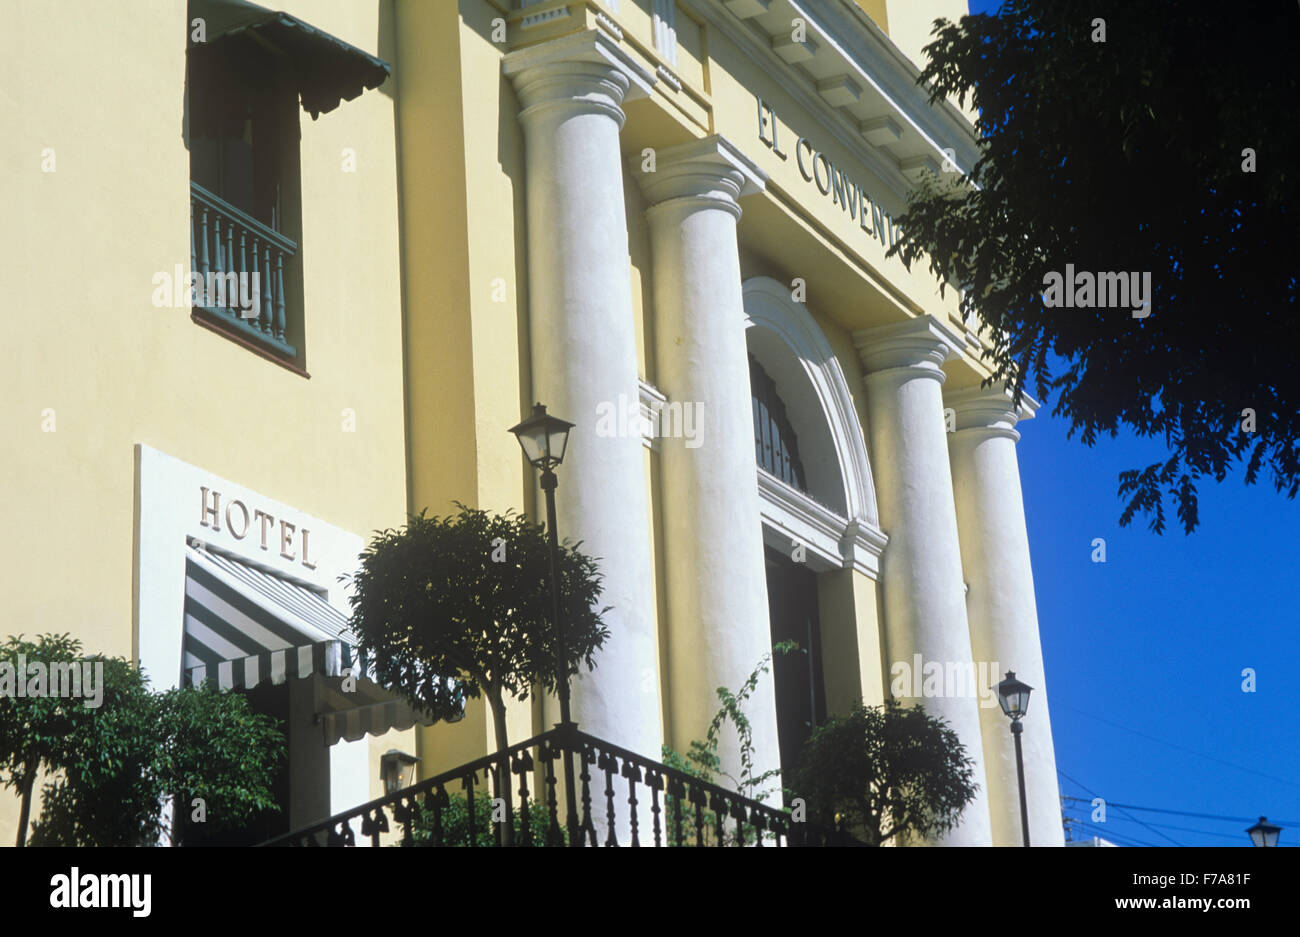 Hotel El Convento provides fine lodging in an historic Old San Juan setting, Puerto Rico. Stock Photo